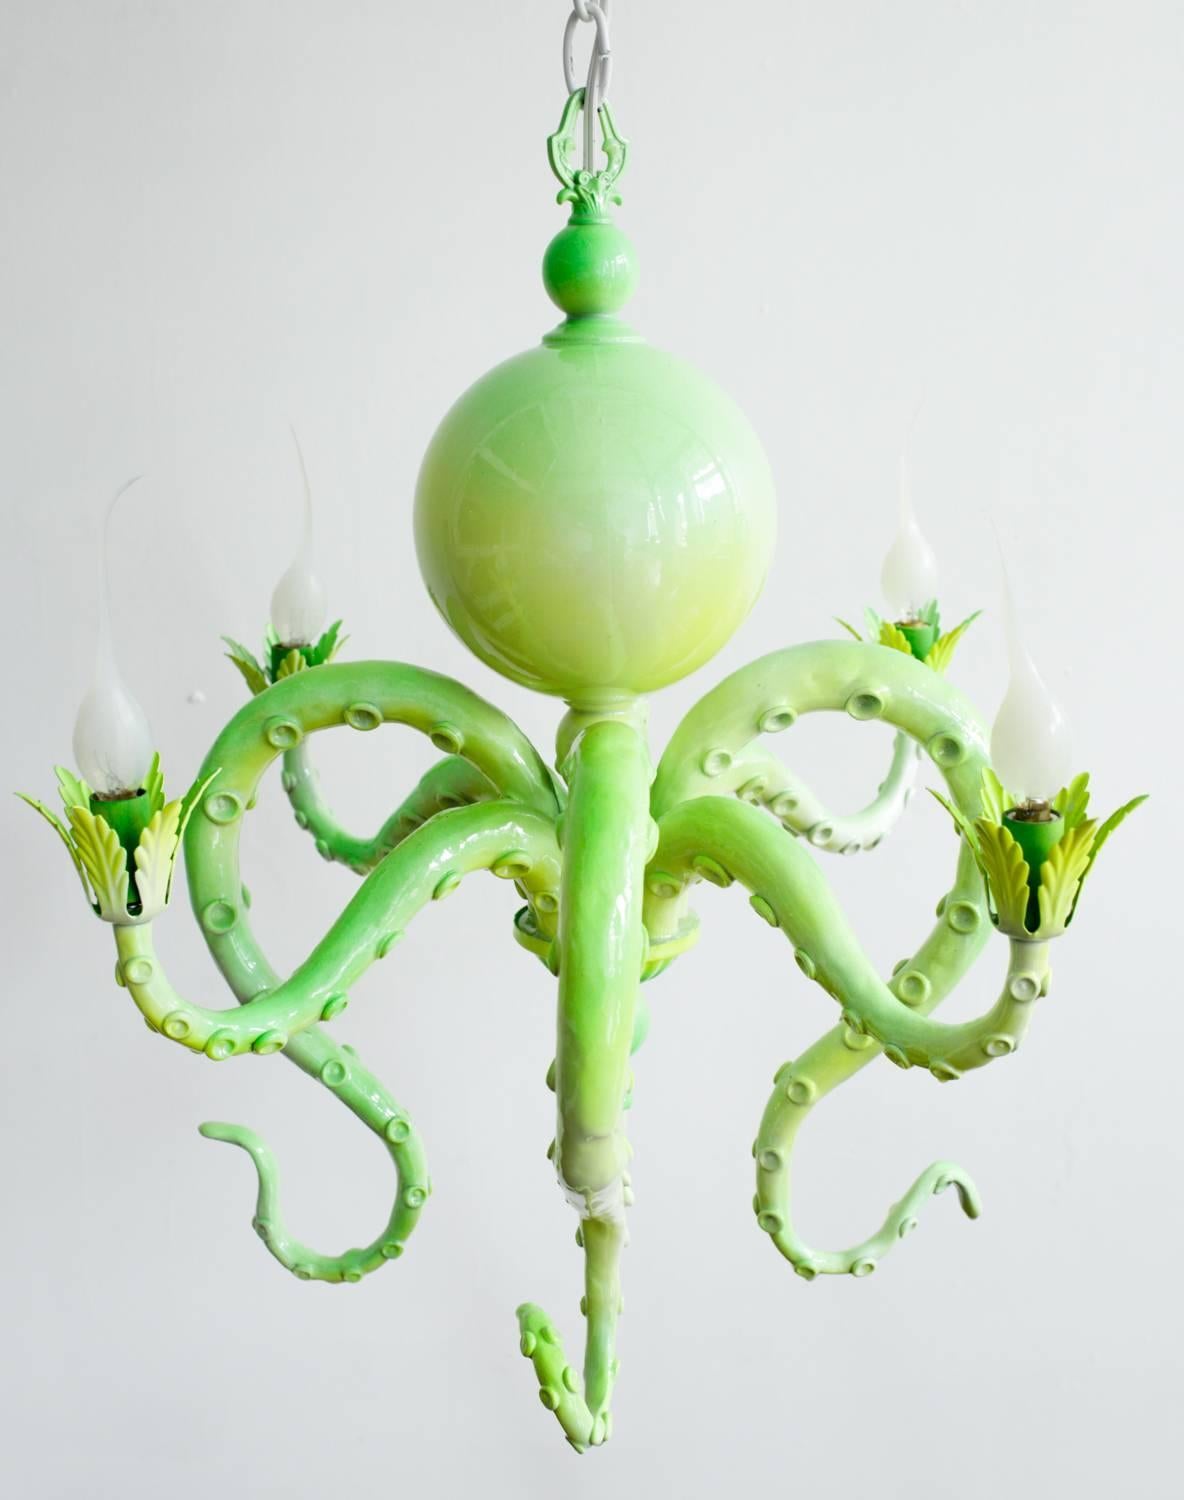 "Chandelier I" Hanging green chandelier with tentacles - Sculpture by Adam Wallacavage